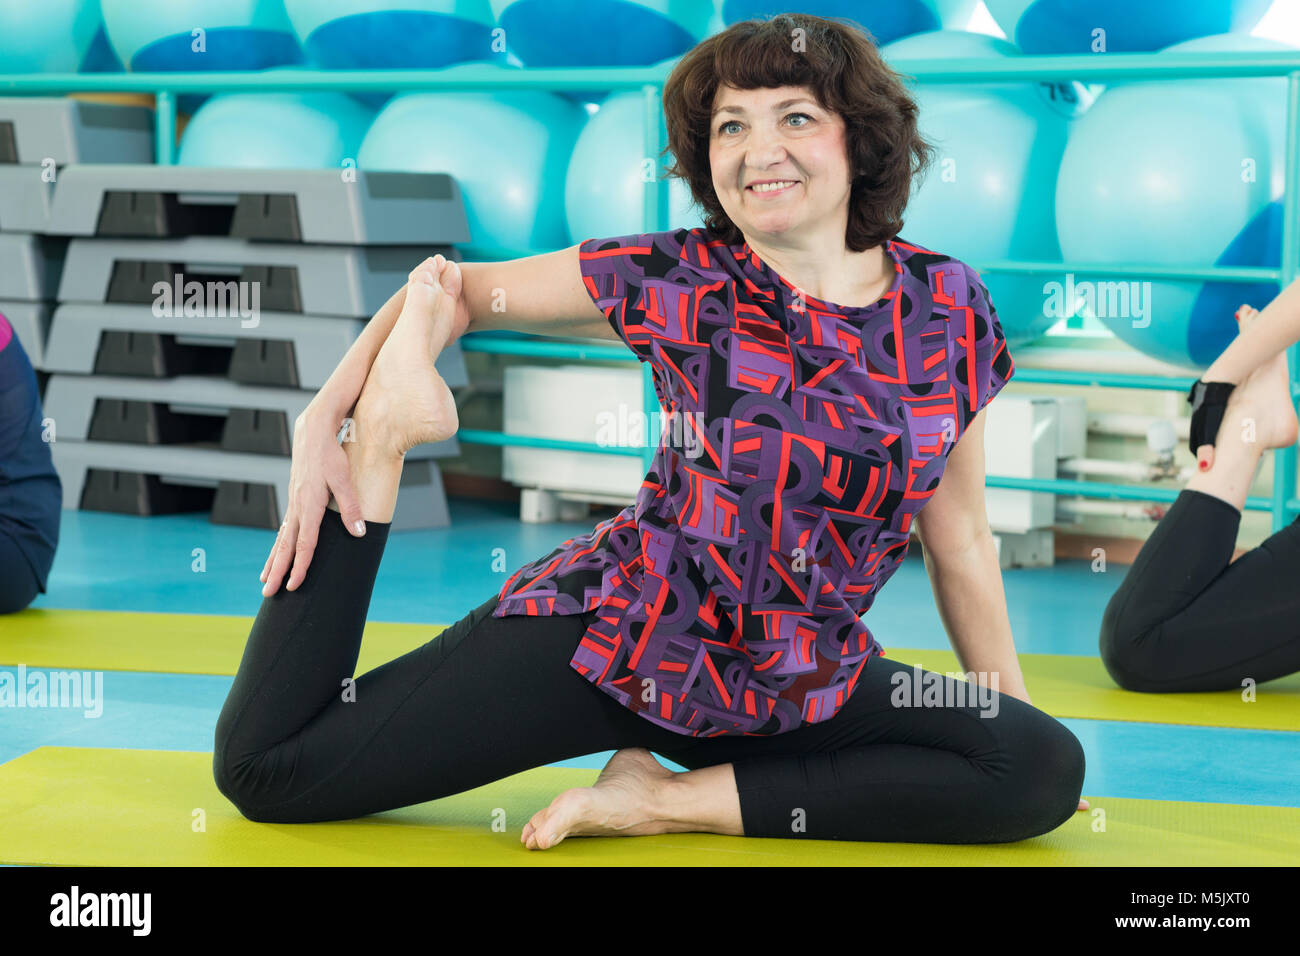 Woman doing yoga exercise in the gym Stock Photo